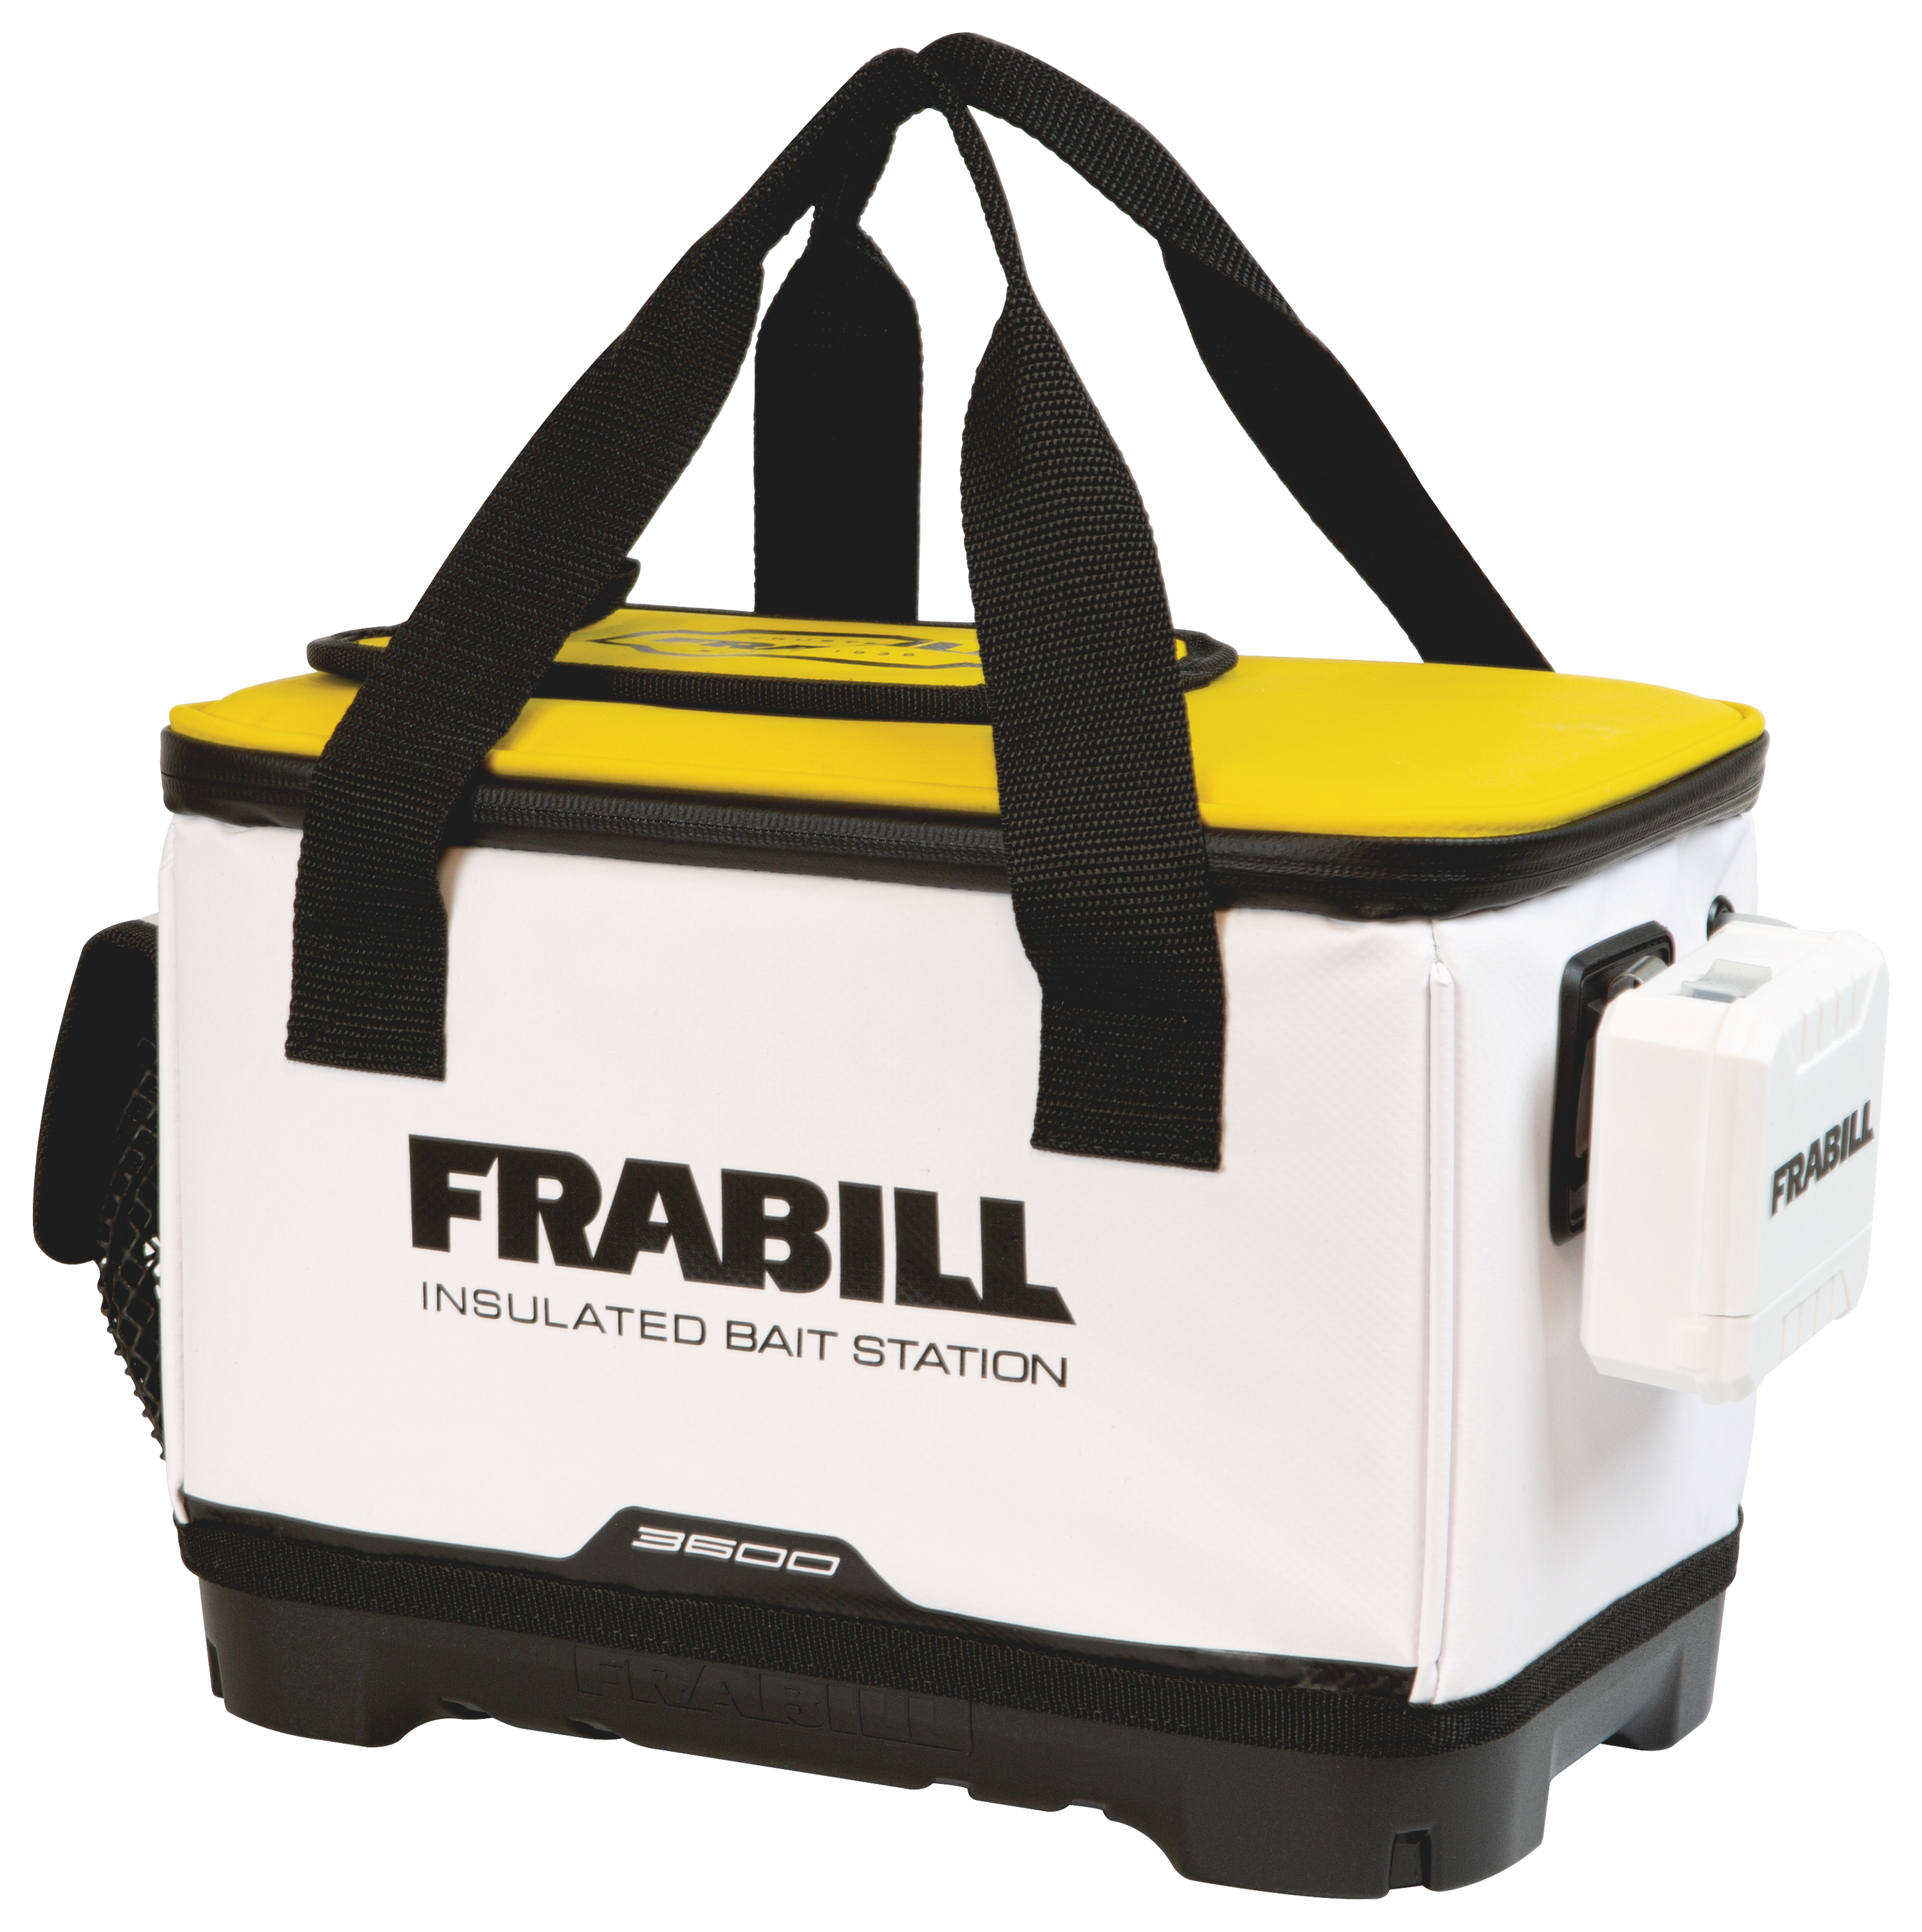 Reliable Fishing Products Insulated Kayak Bag 20 x 36 -takes up less  space and keeps your fish fresh and protected, no matter the elements.  Produced in USA,White : : Sports, Fitness 